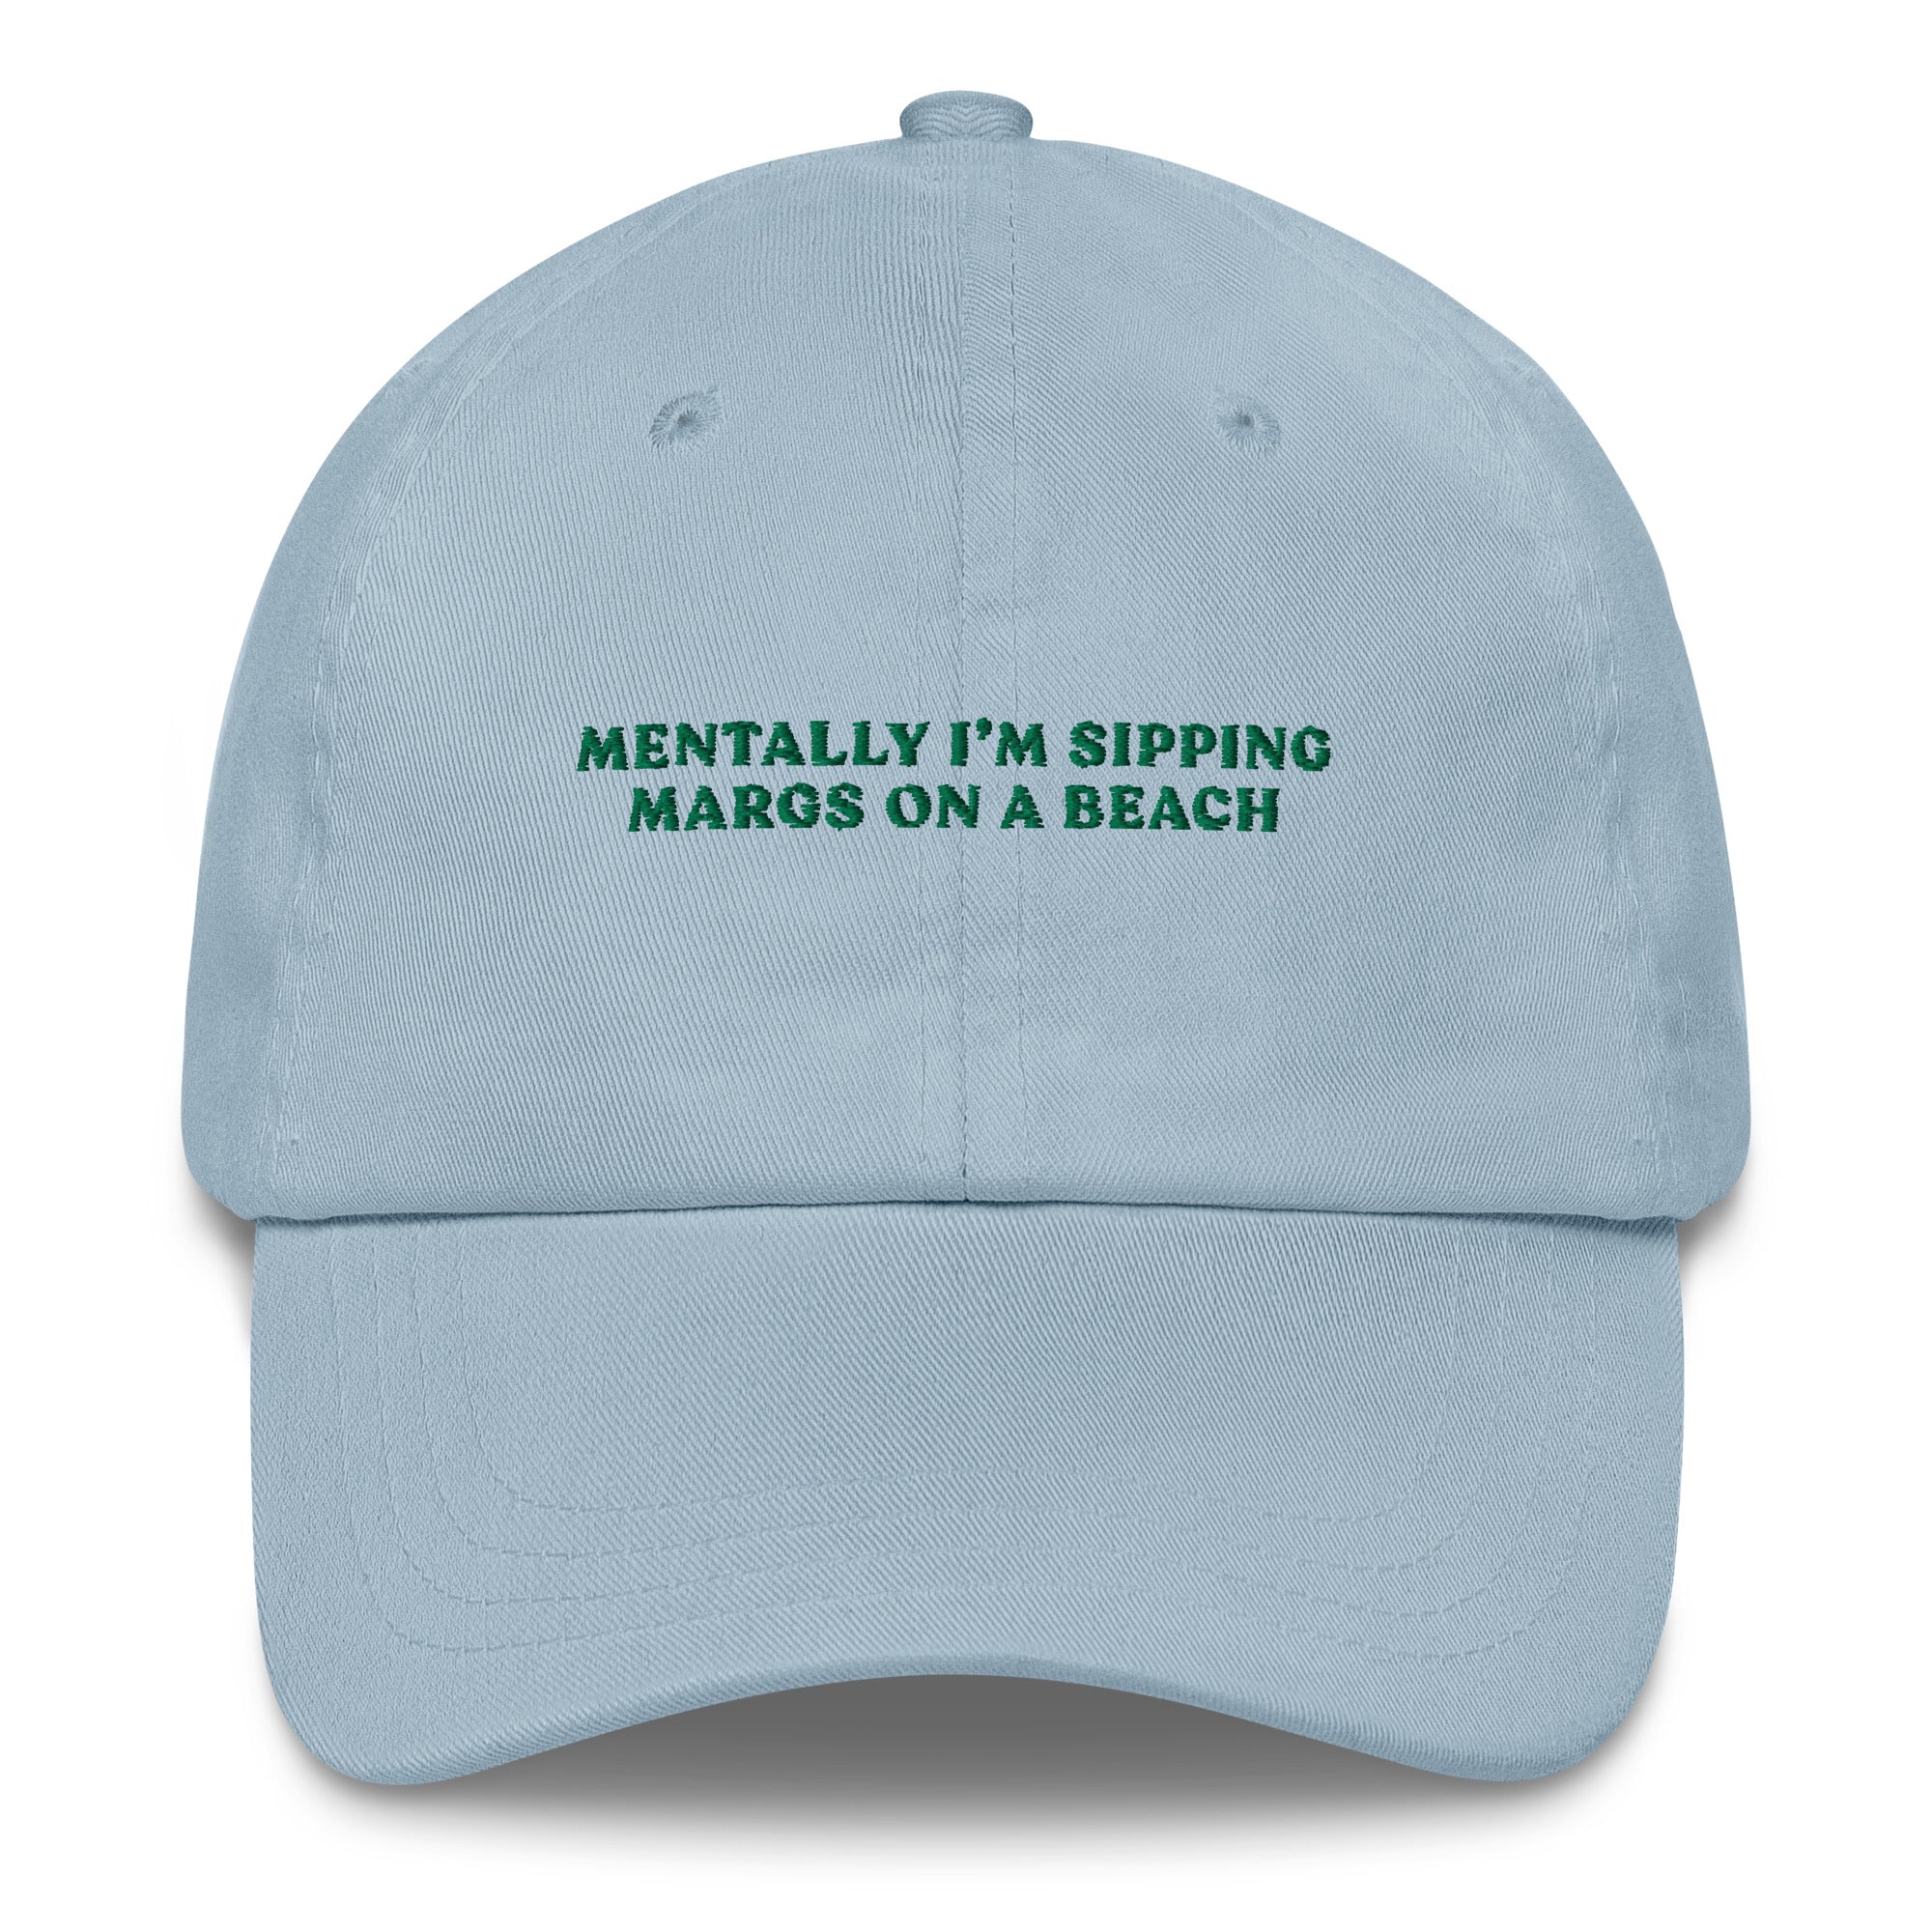 Mentally I'm sipping margs on a beach - Cap